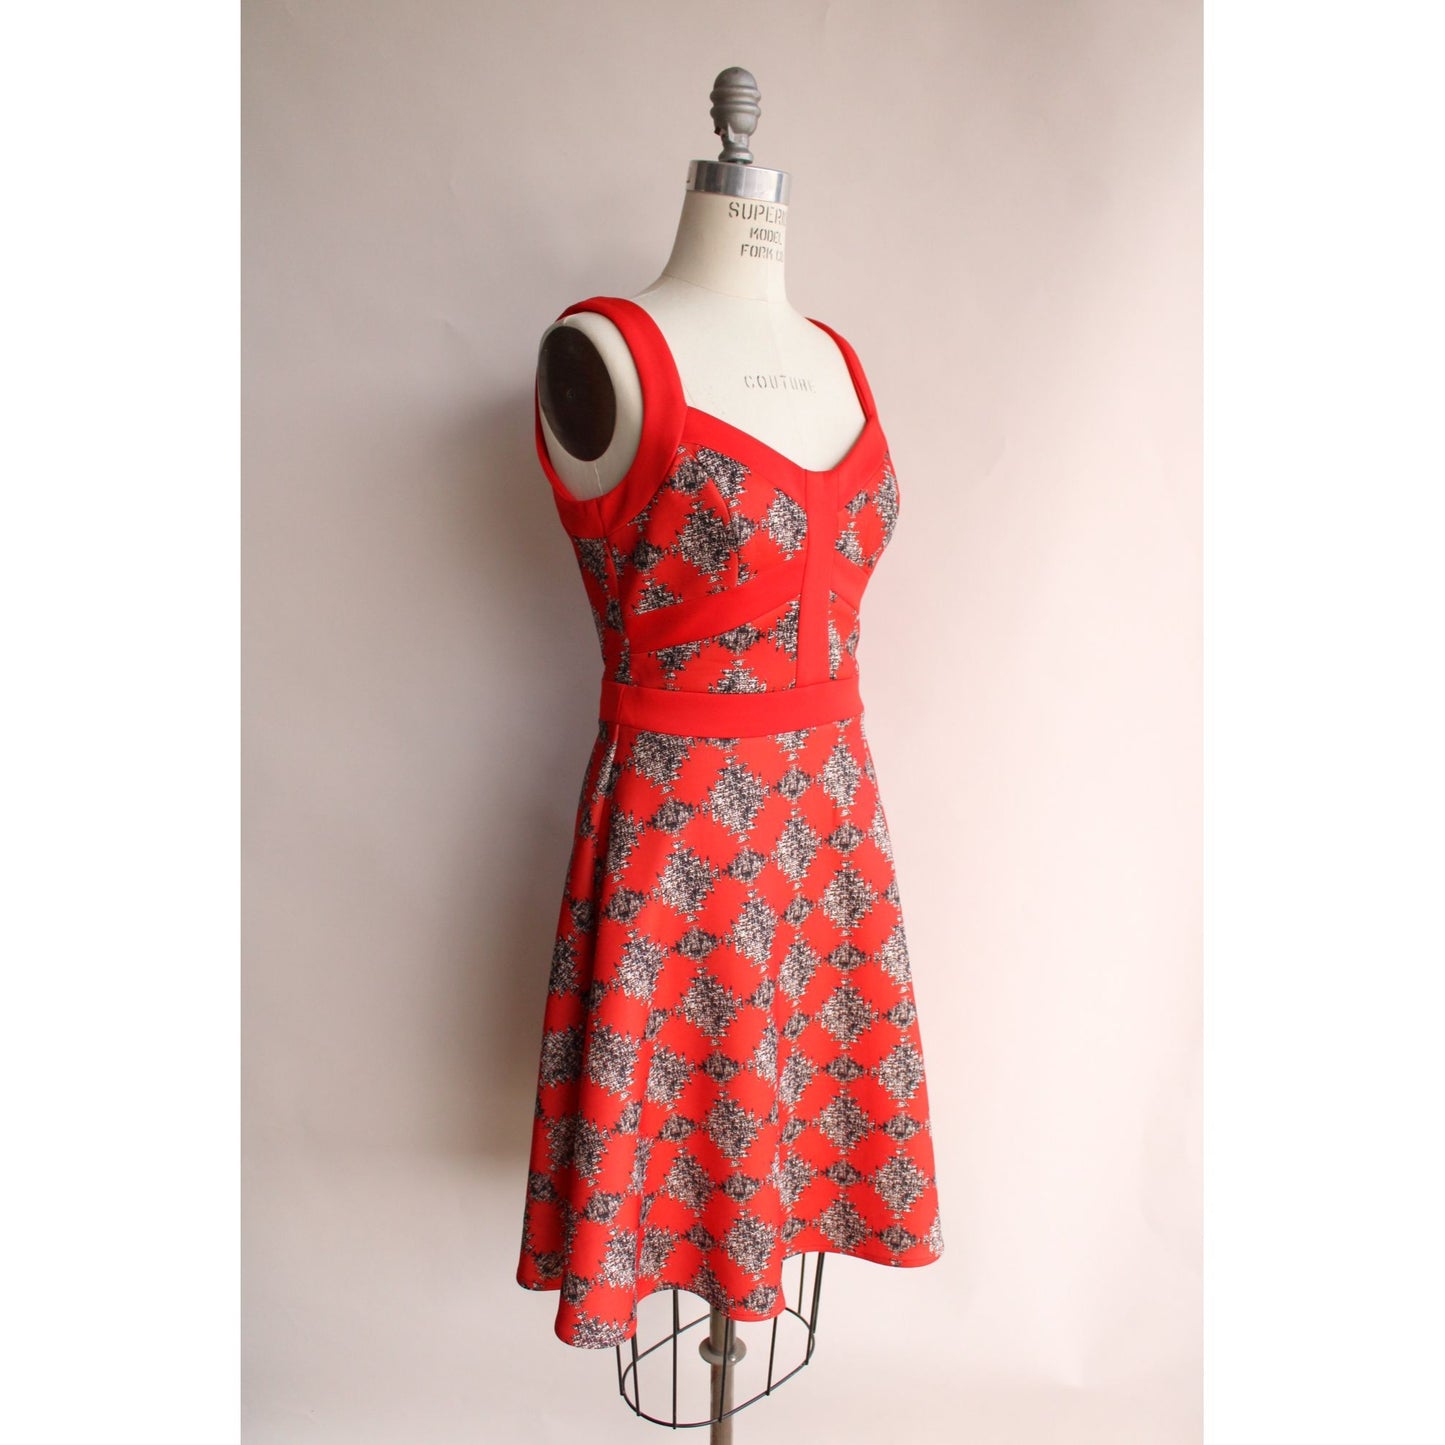 XoXo dress, Size Small, red geometric print, fit and flare